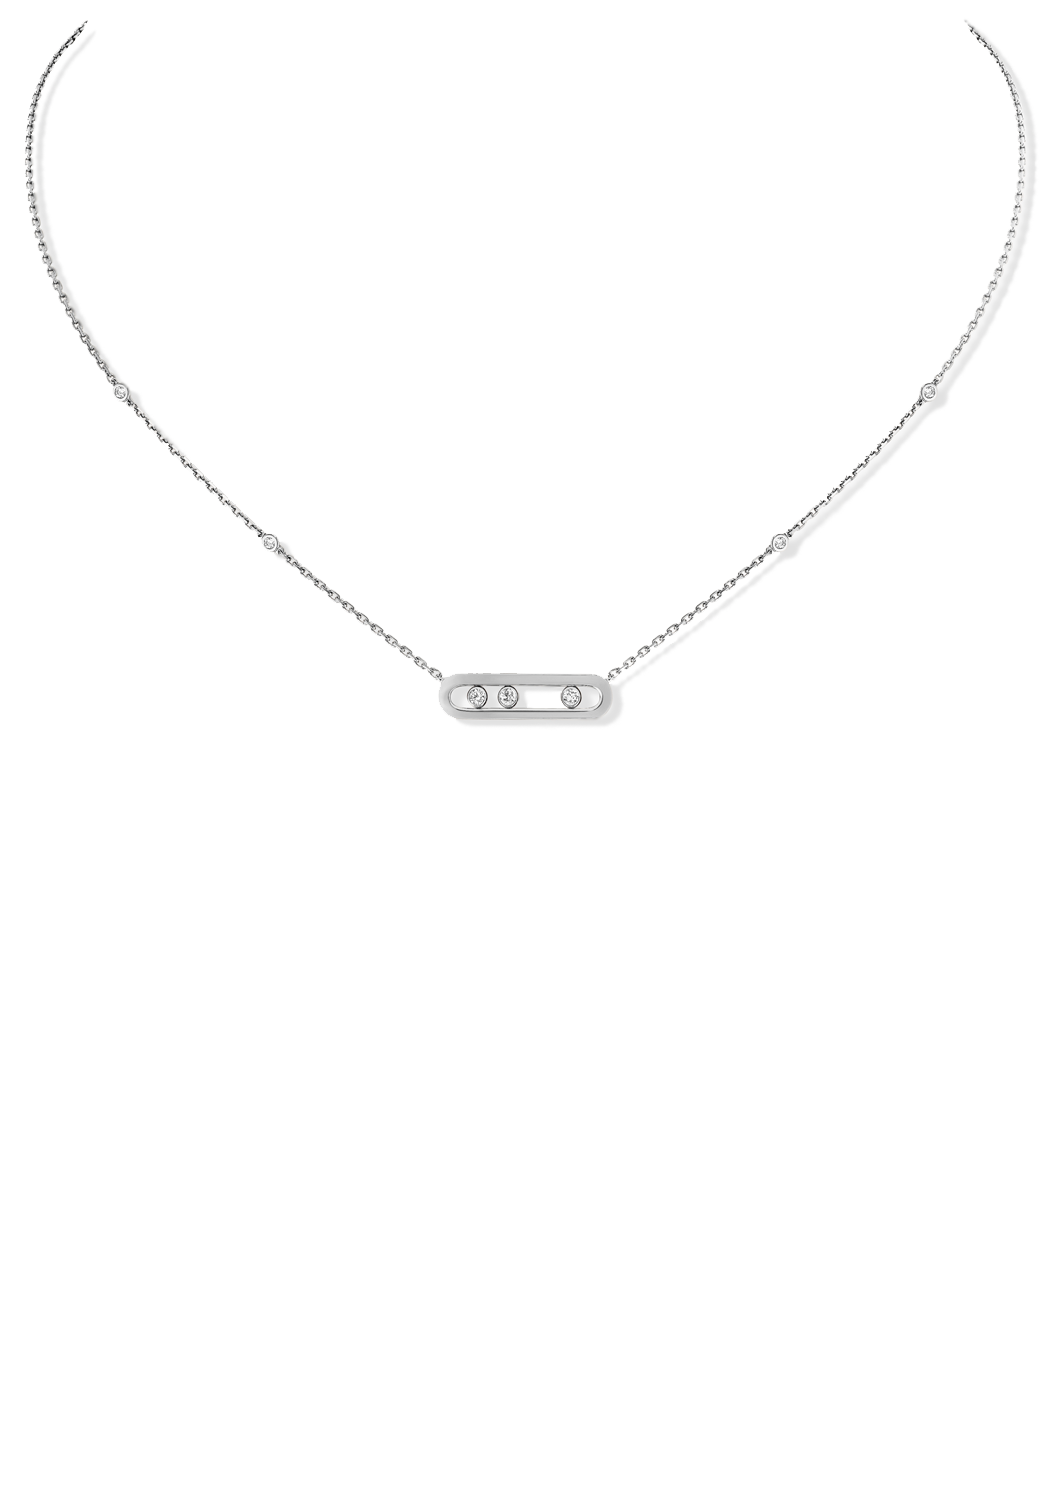 Messika Baby Move 18K White Gold Diamond Necklace | Ref. 04323-WG | OsterJewelers.com

